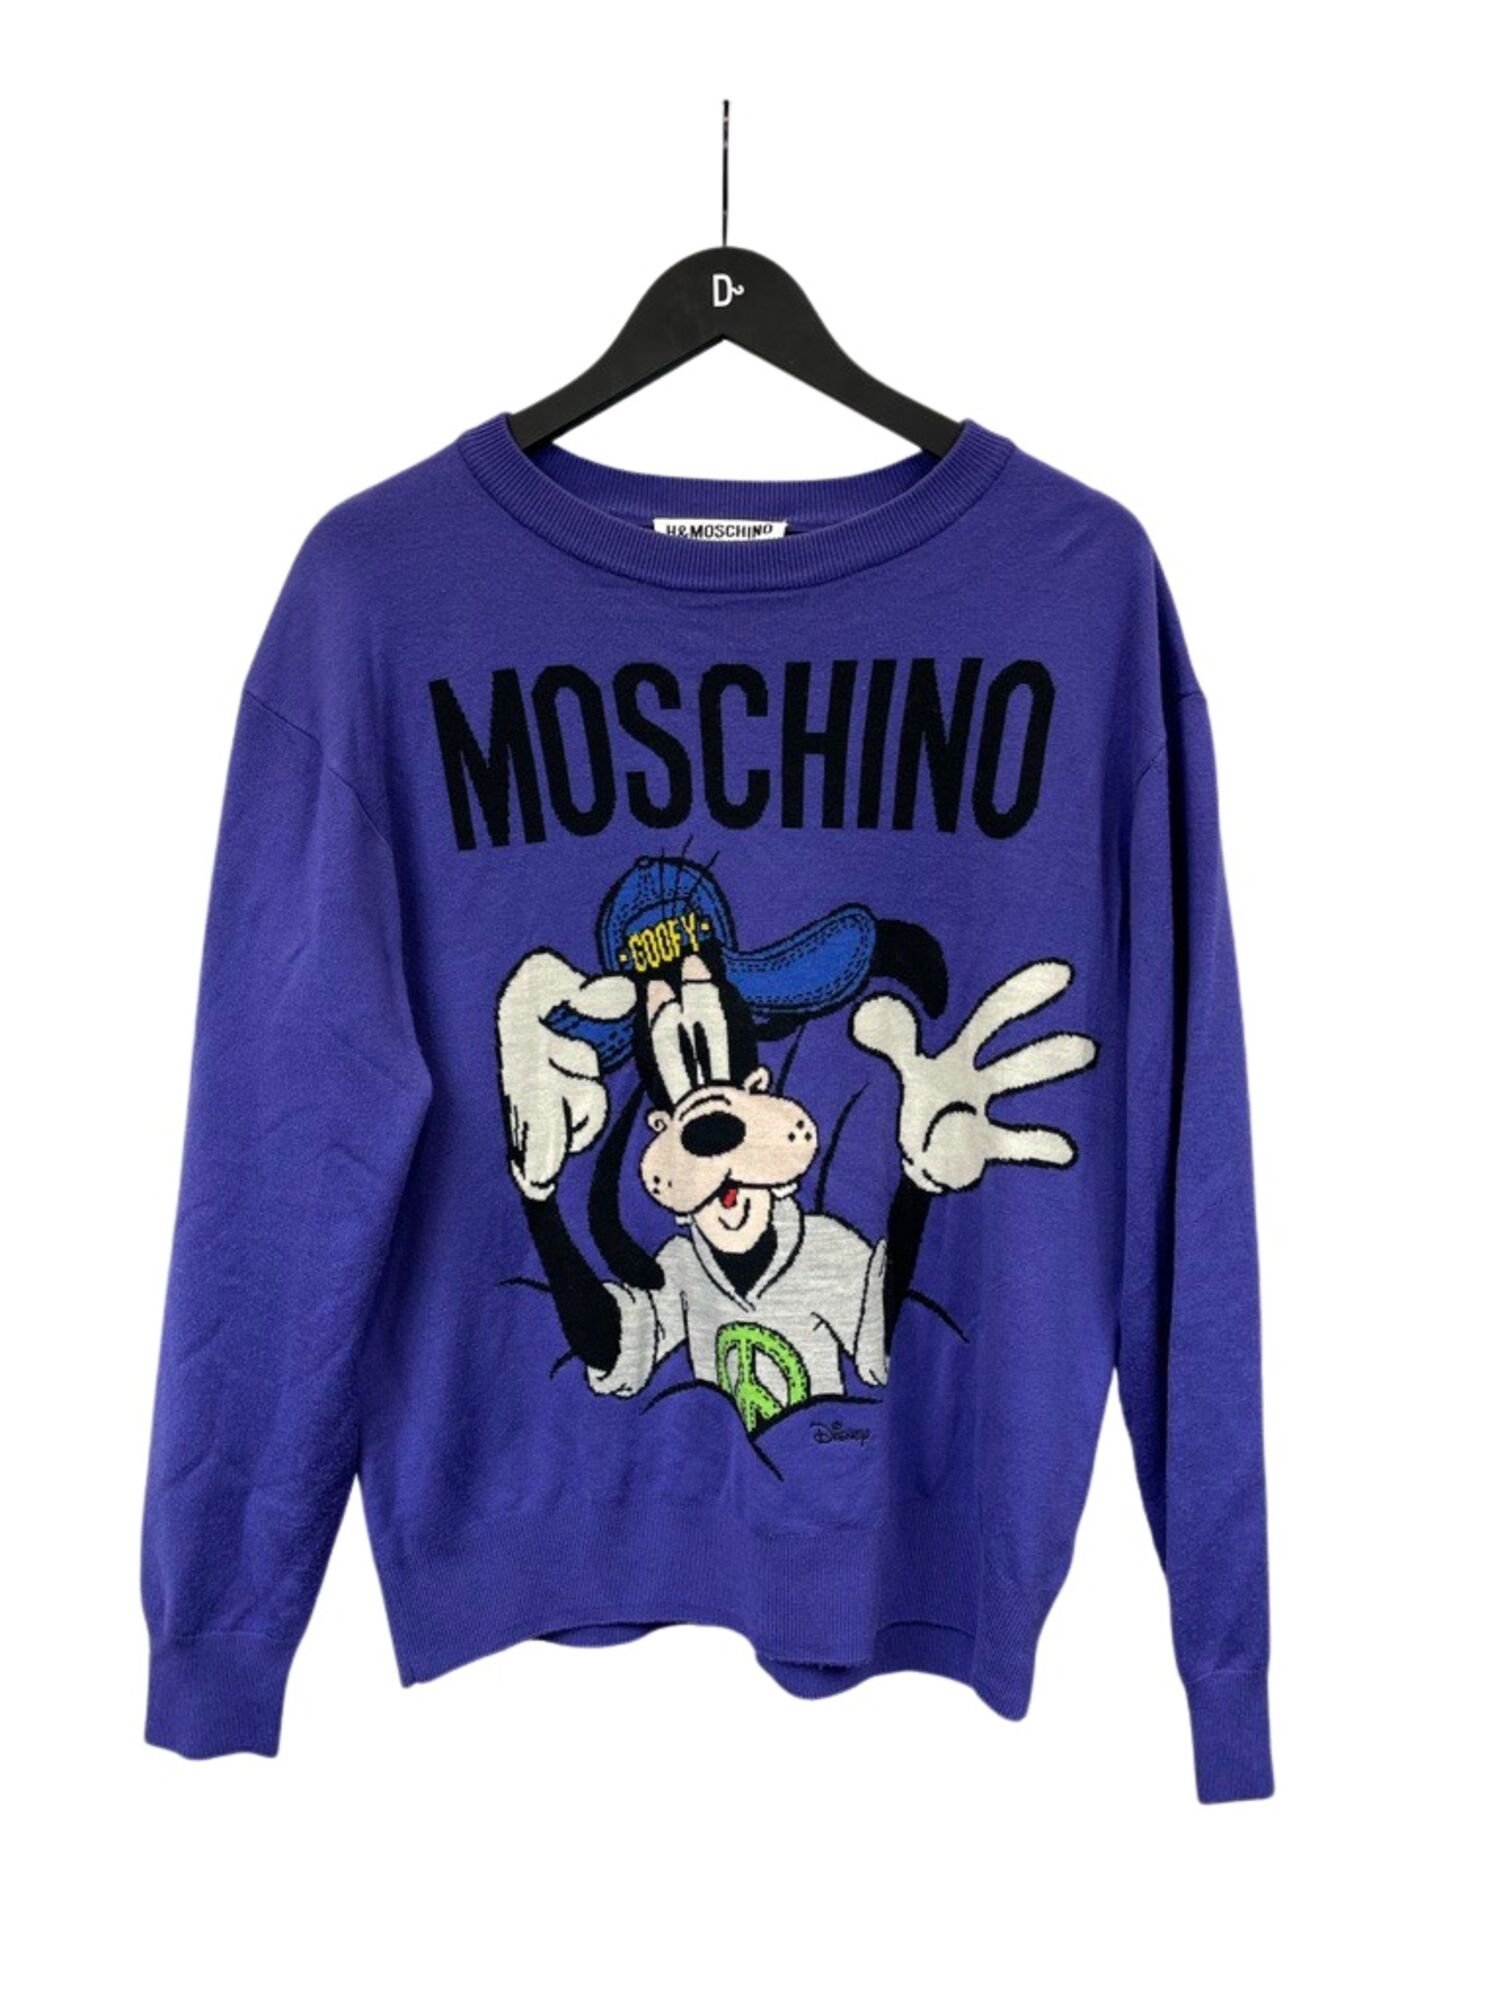 Goofy sweater Moschino x H&M - L, buy pre-owned at 60 EUR